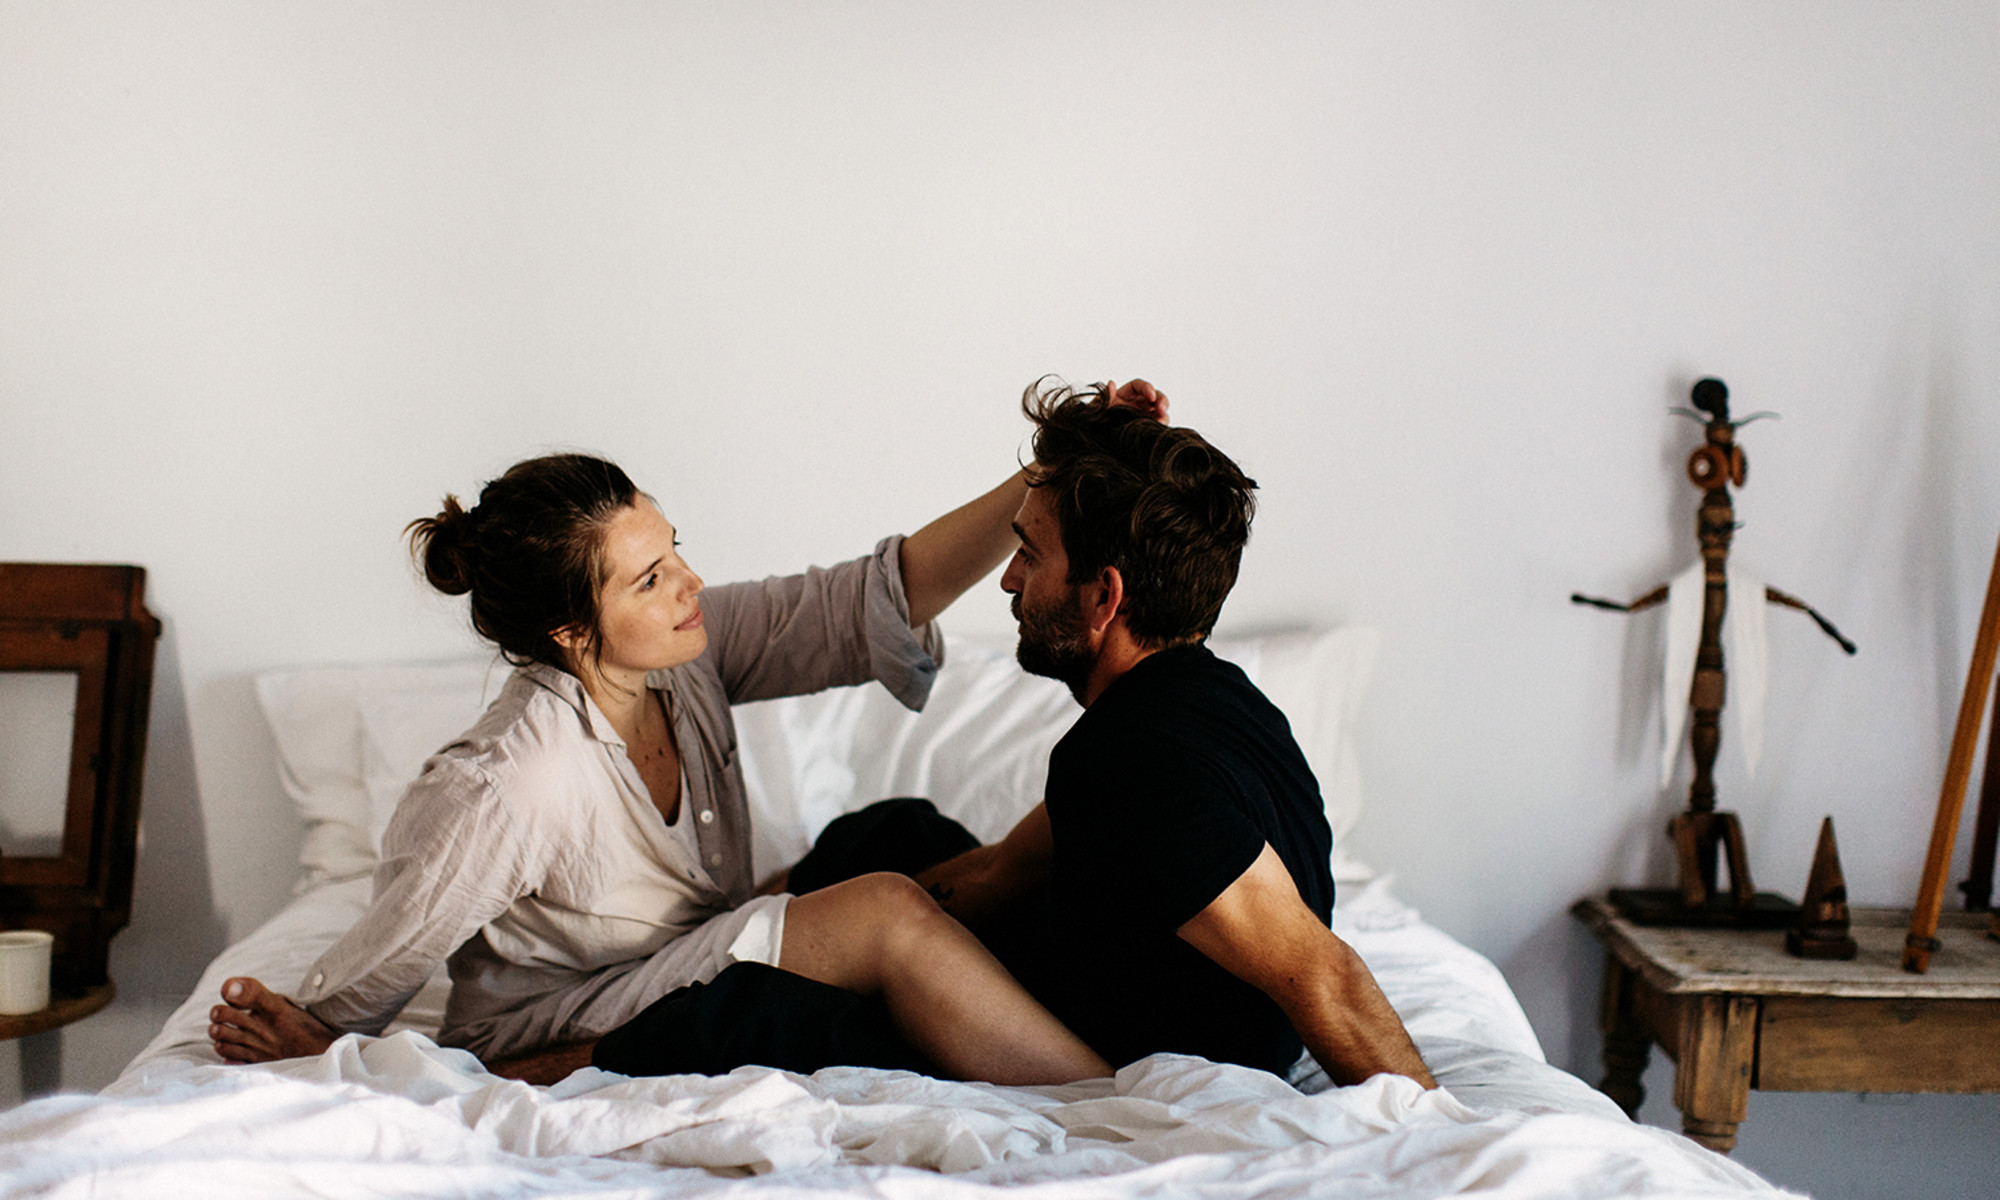 Is It OK To Masturbate When Your Partner Is Home? mindbodygreen pic